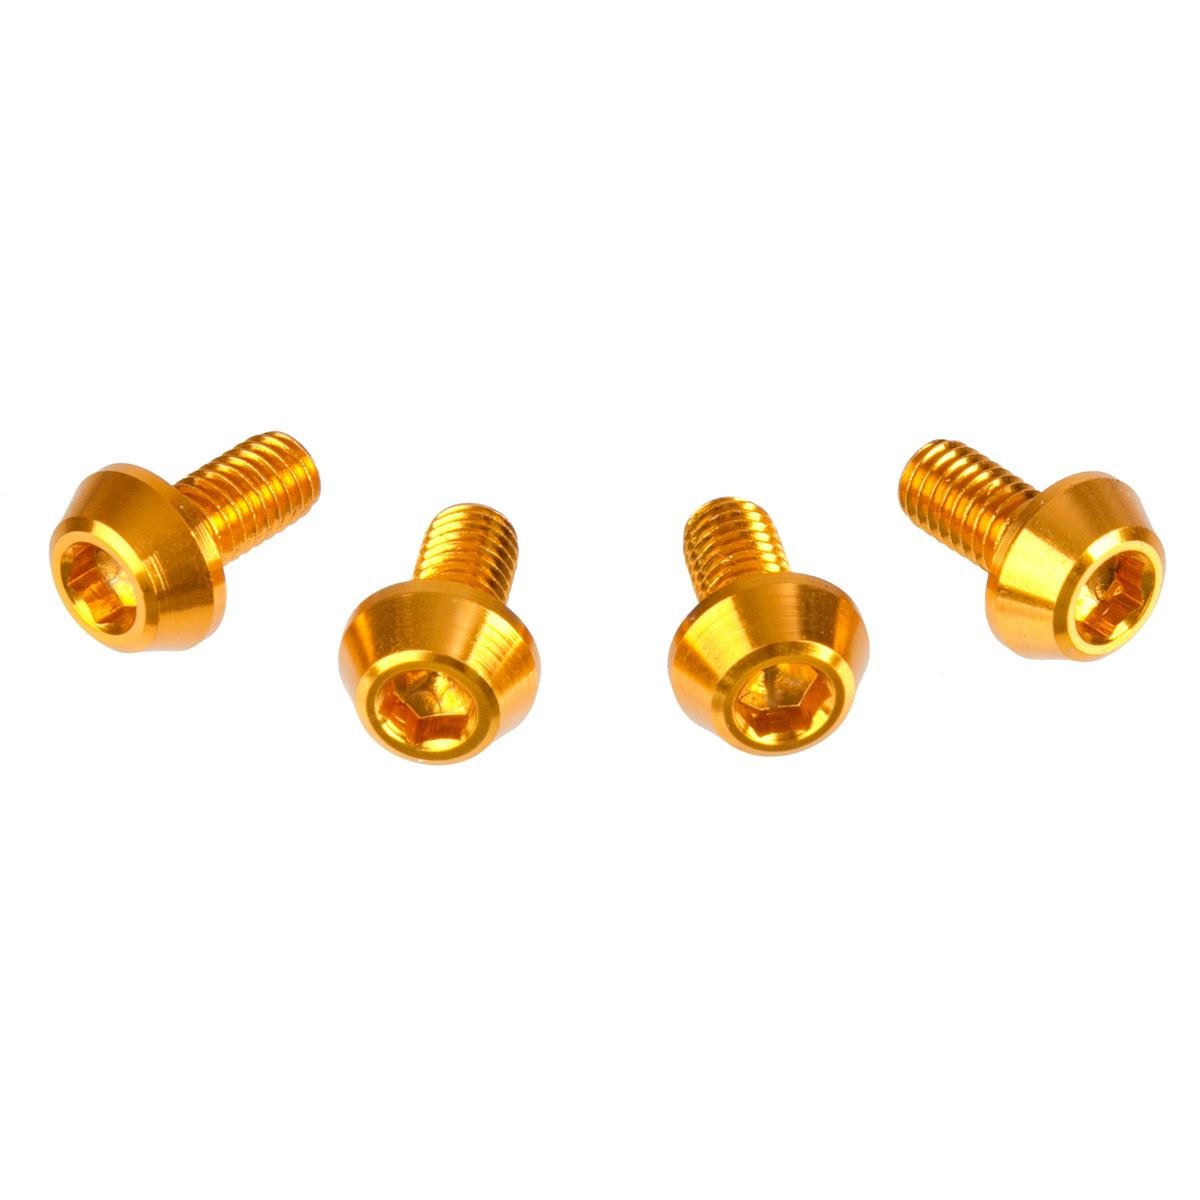 DRC Inner Hex Bolts  M6 x 12 mm, Gold, Pack of 4